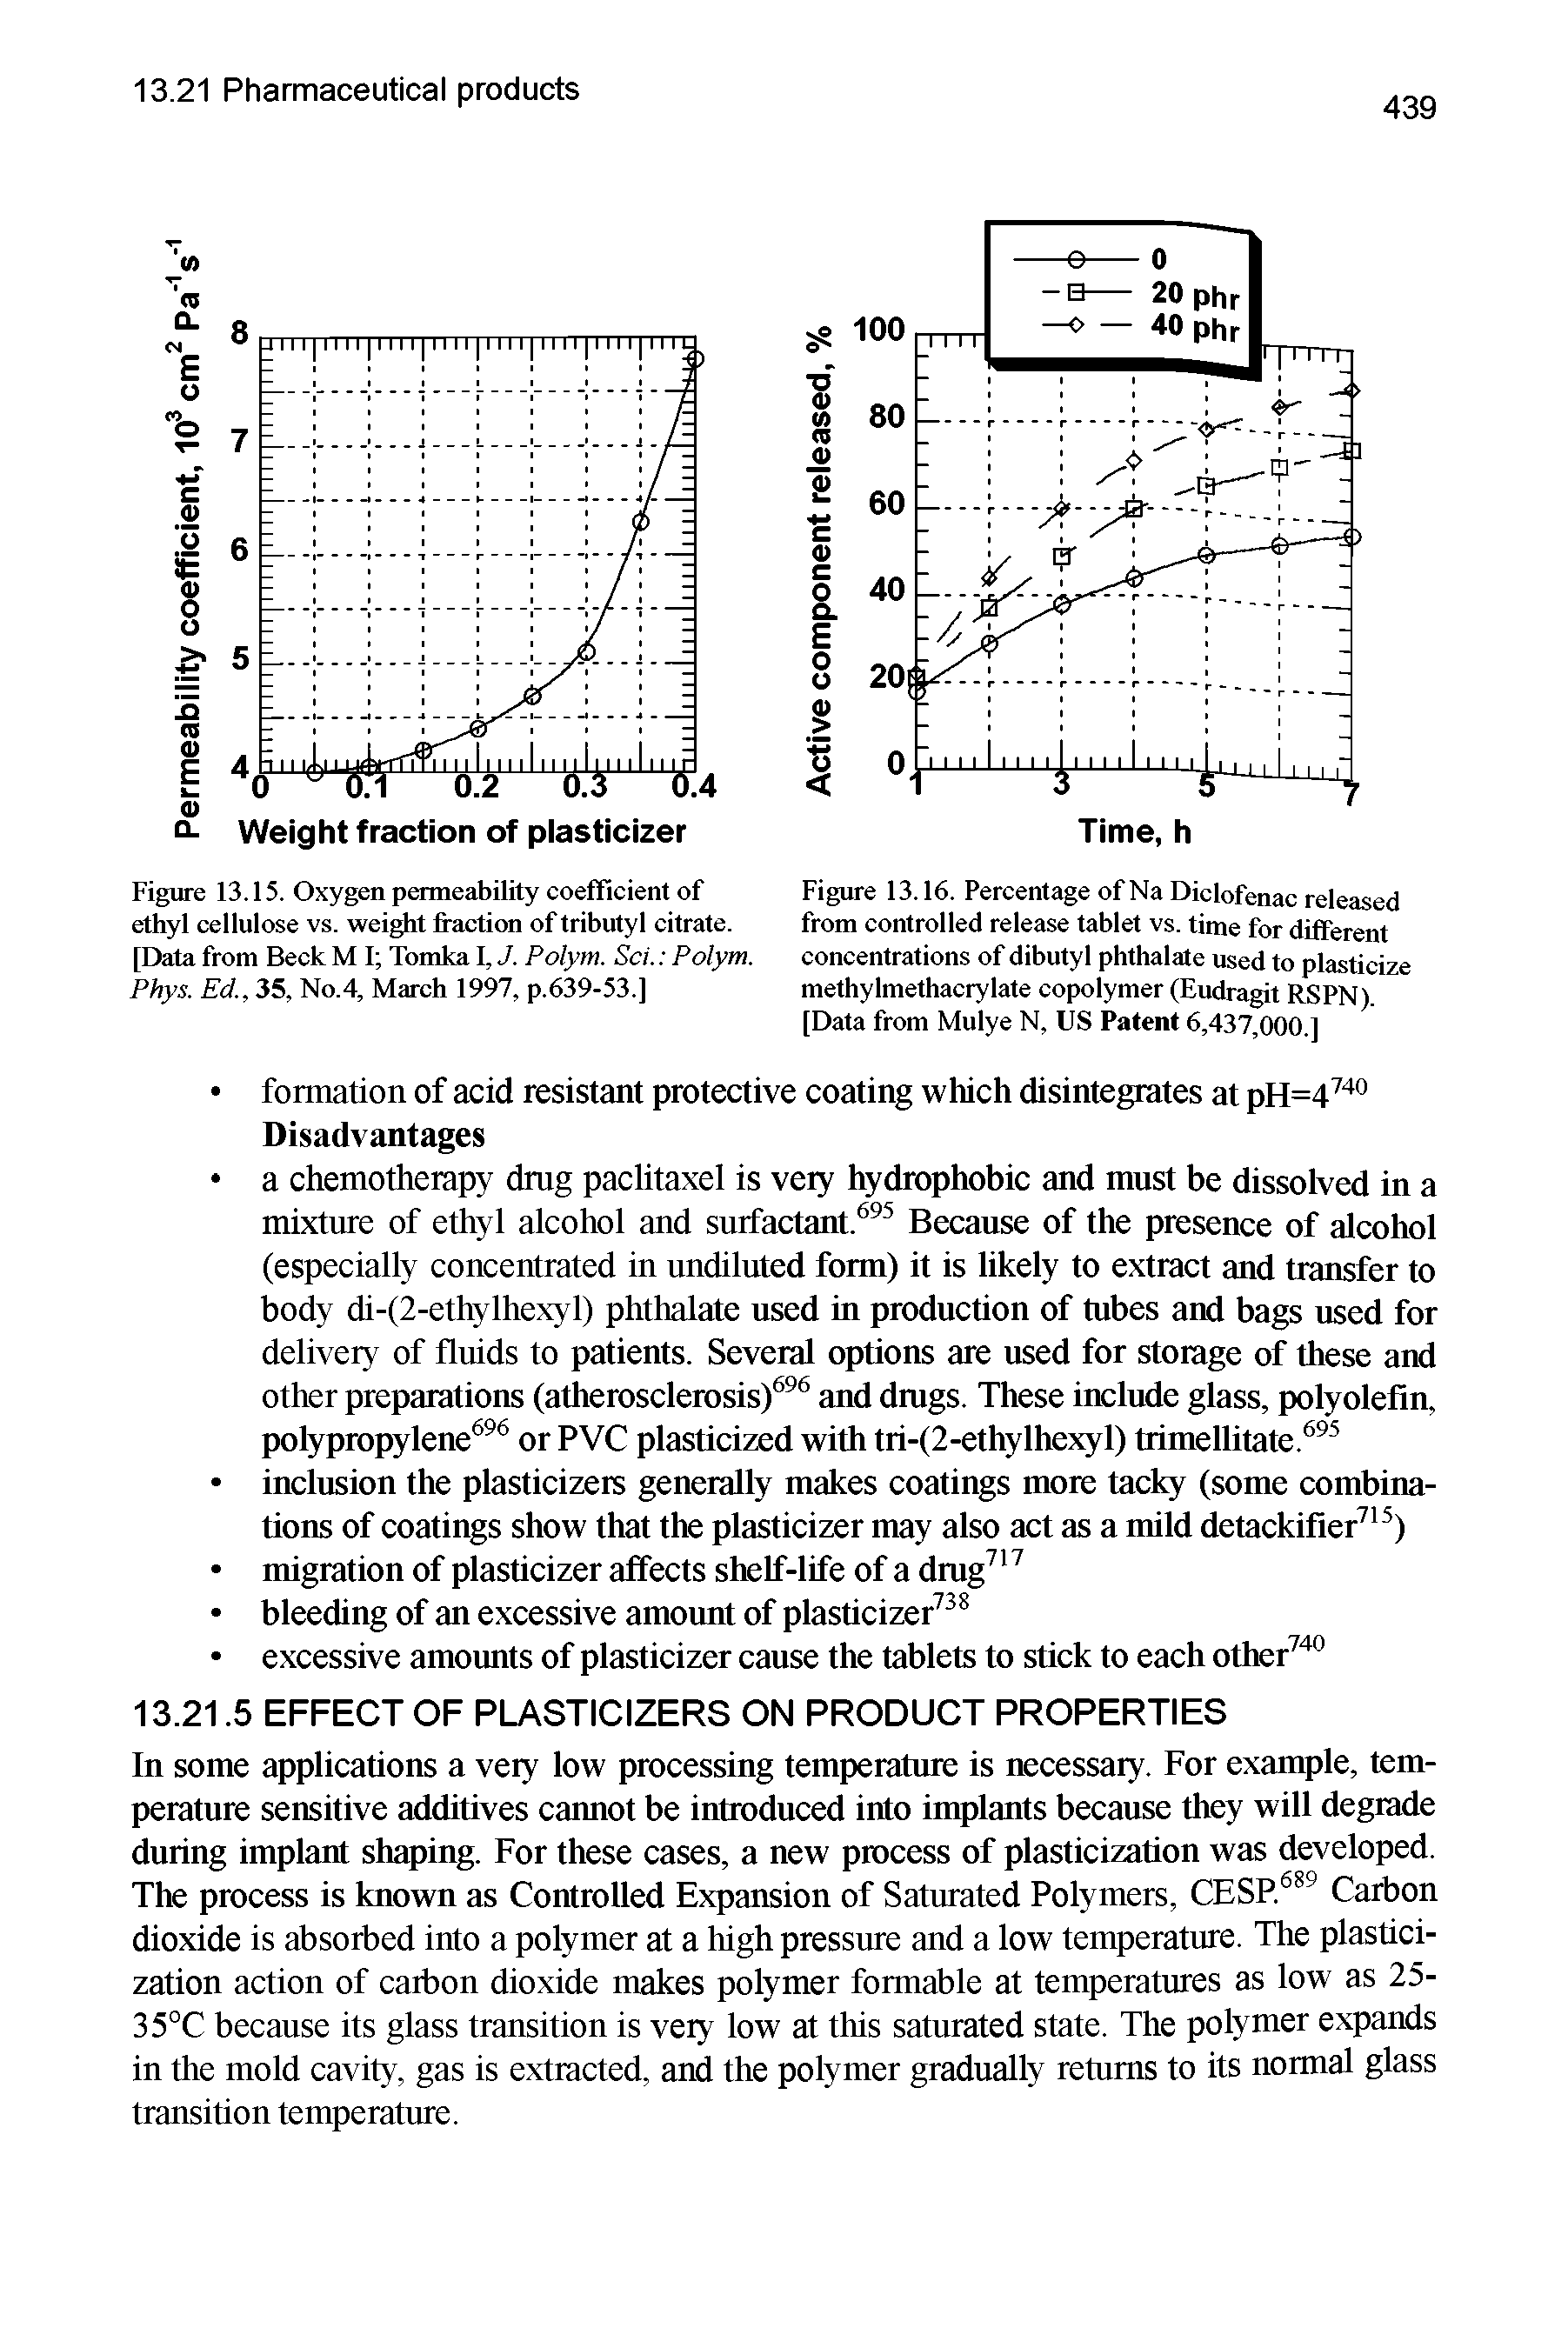 Figure 13.16. Percentage of Na Diclofenac released from controlled release tablet vs. time for different concentrations of dibutyl phthalate used to plasticize methylmethacrylate copolymer (Eudragit RisPN). [Data from Mulye N, US Patent 6,437,000.]...